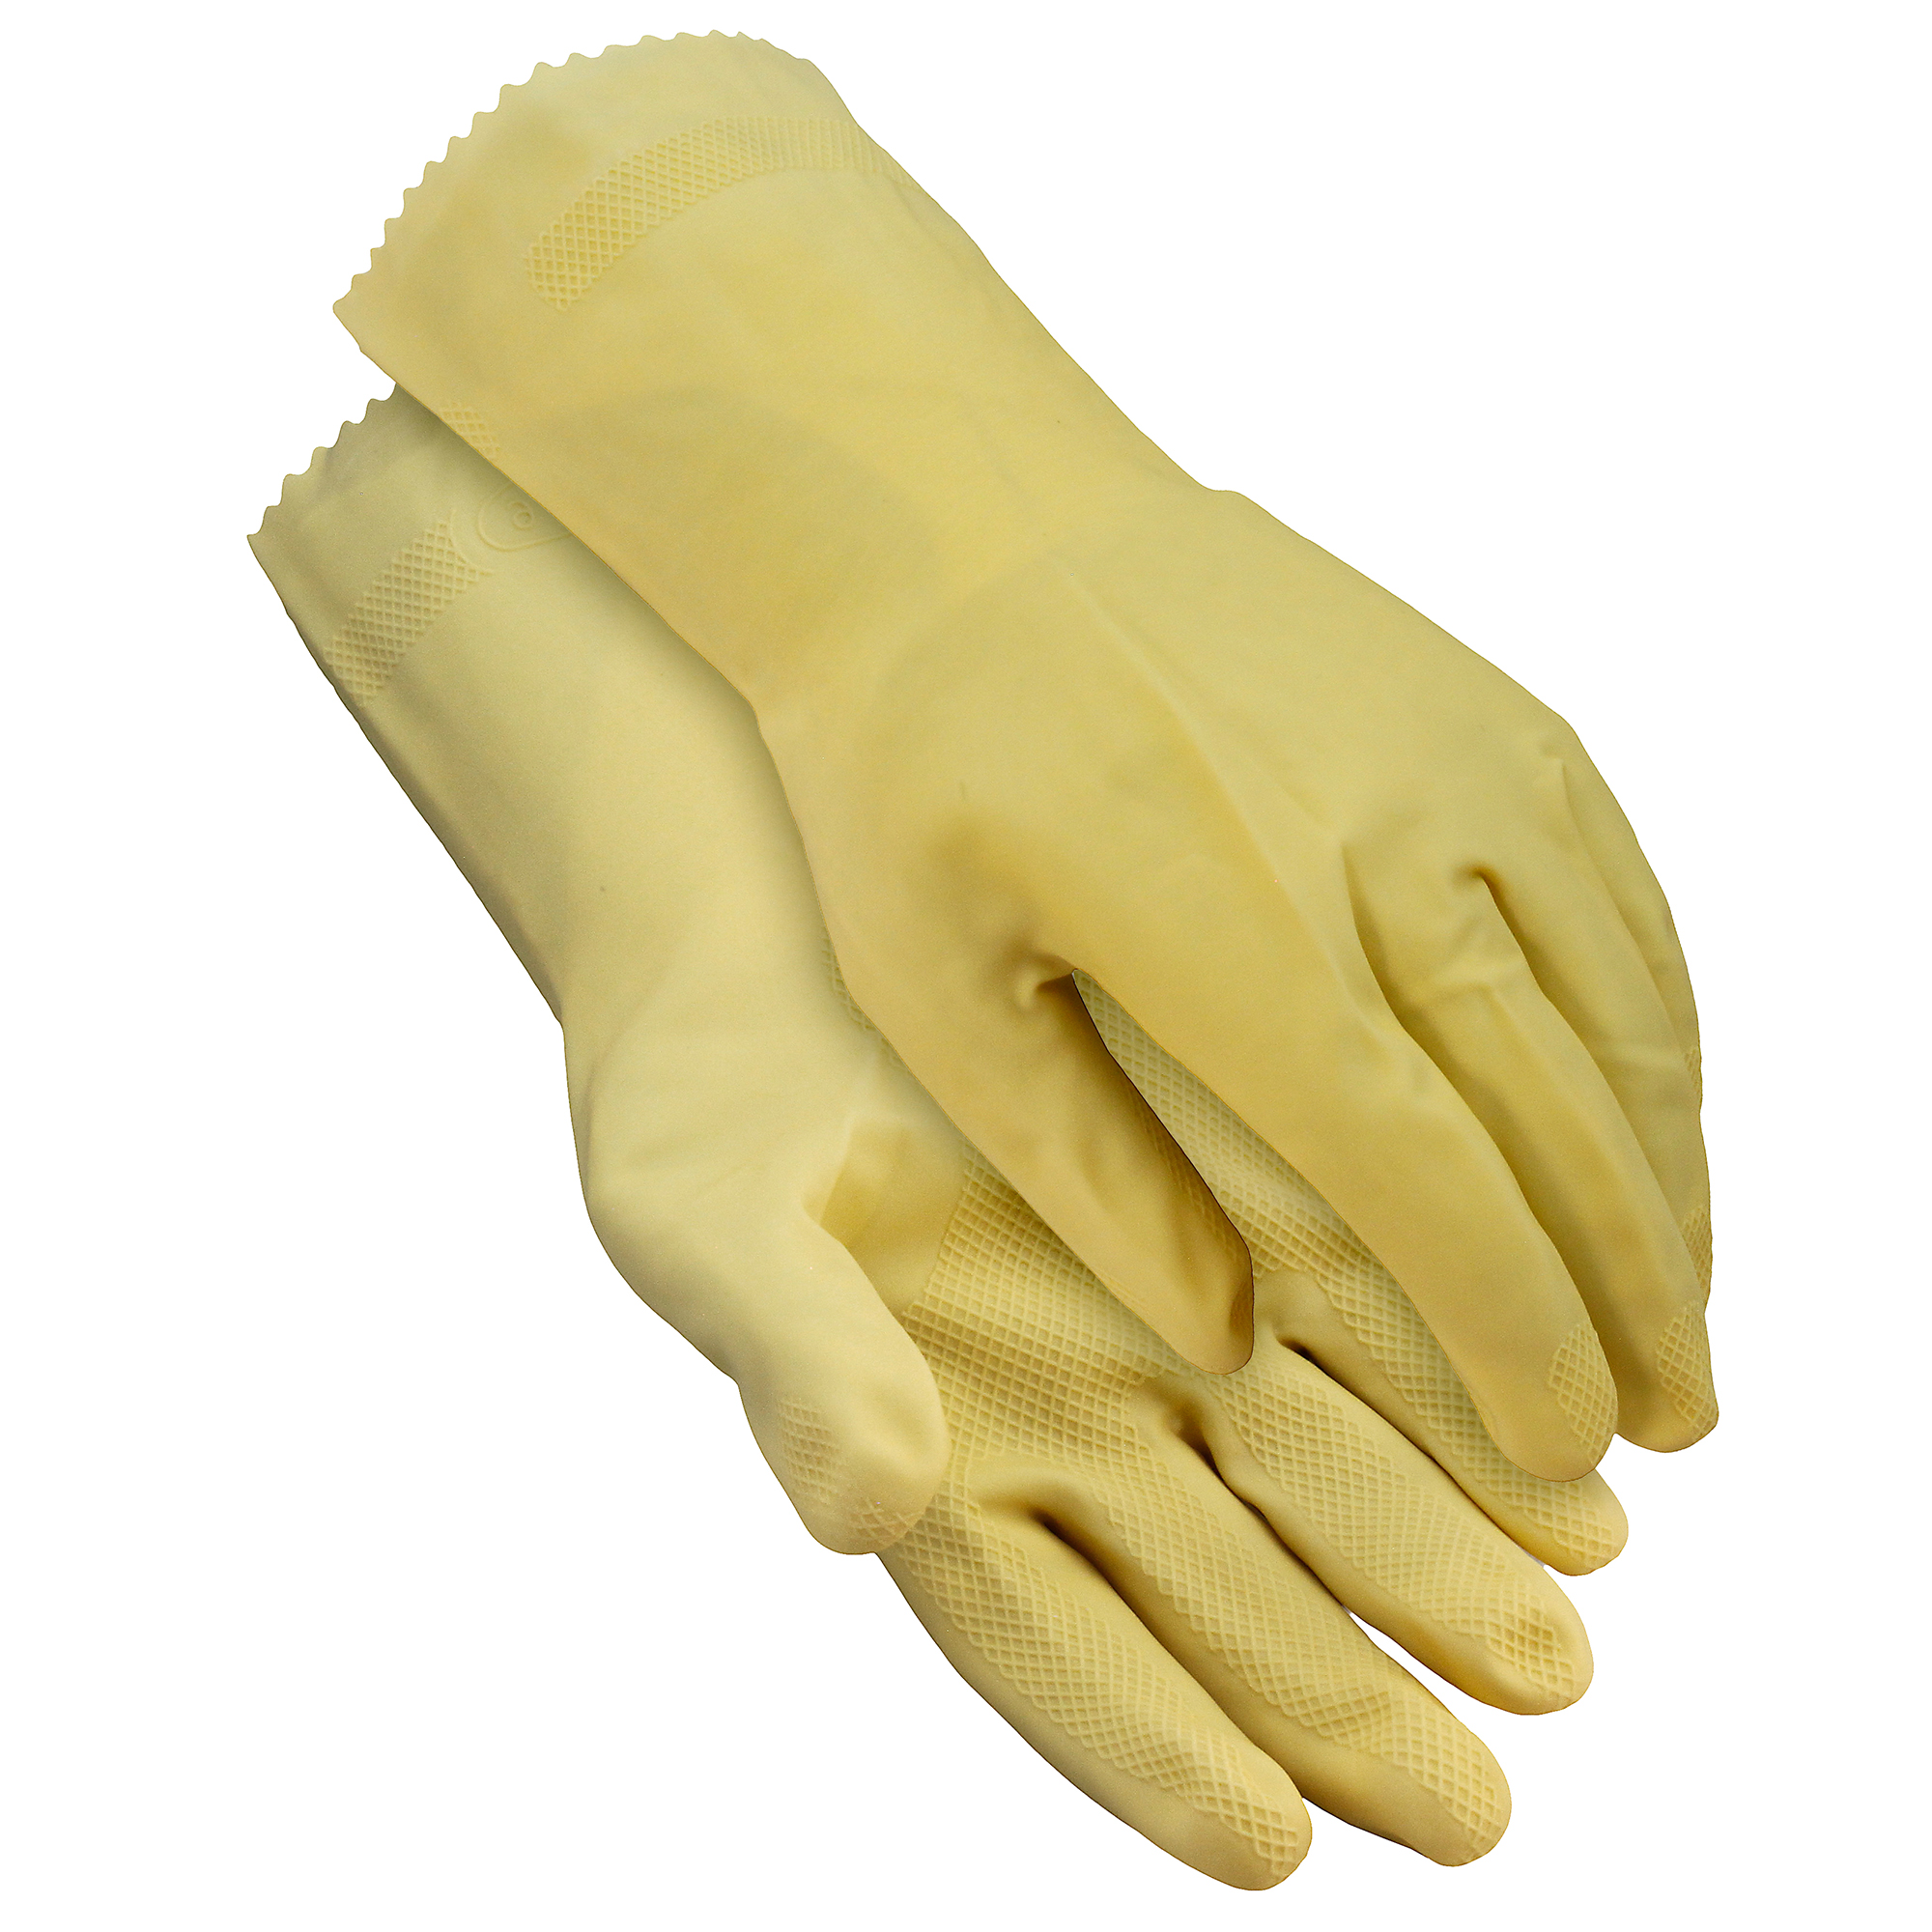 Latex Canners Gloves, Unlined, Natural